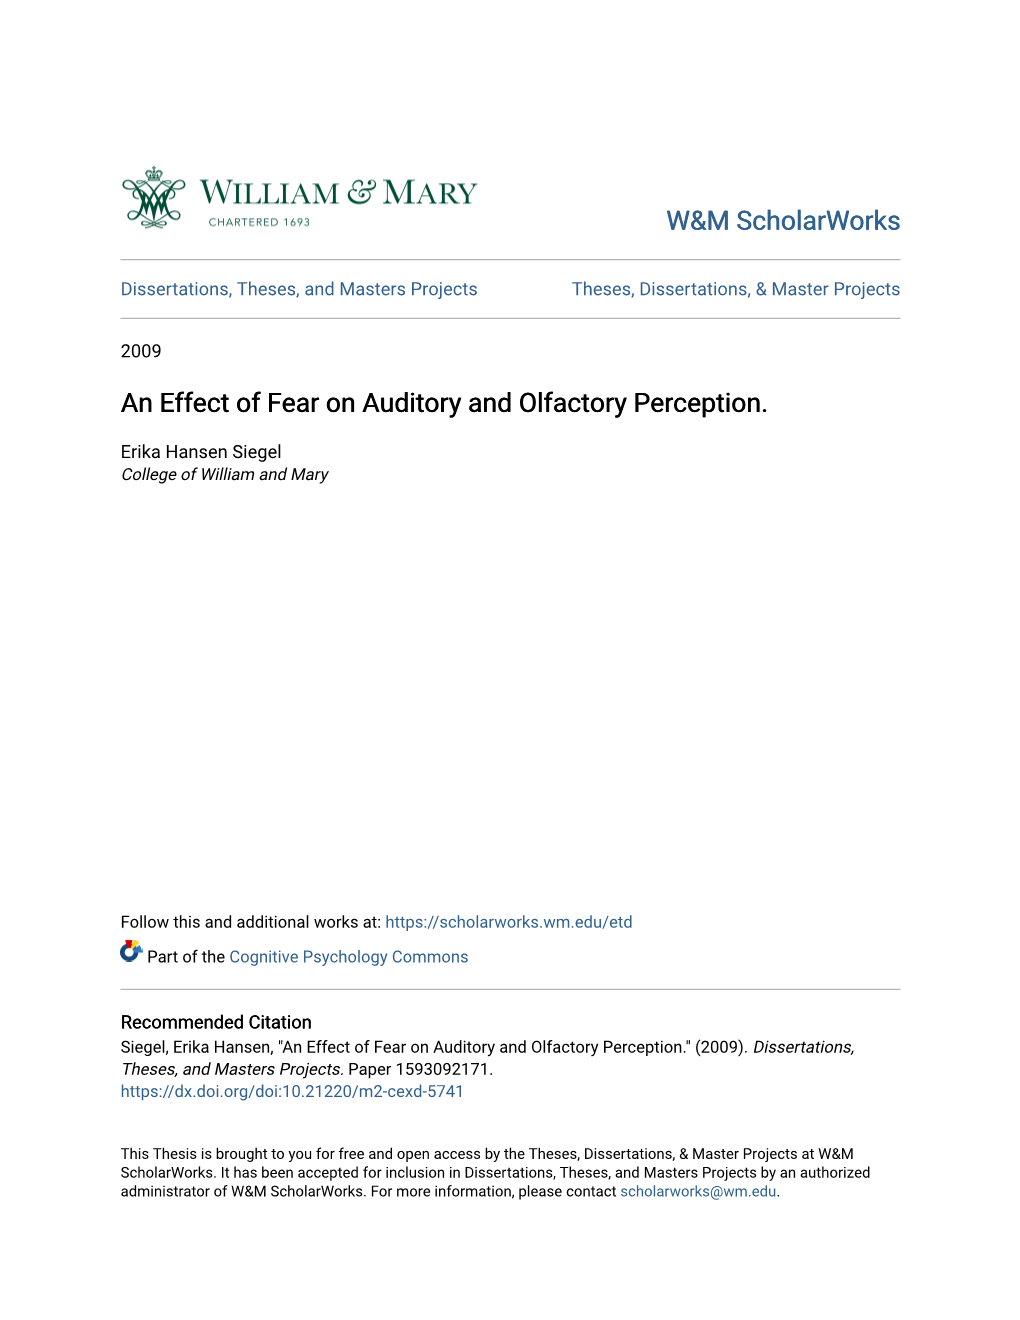 An Effect of Fear on Auditory and Olfactory Perception